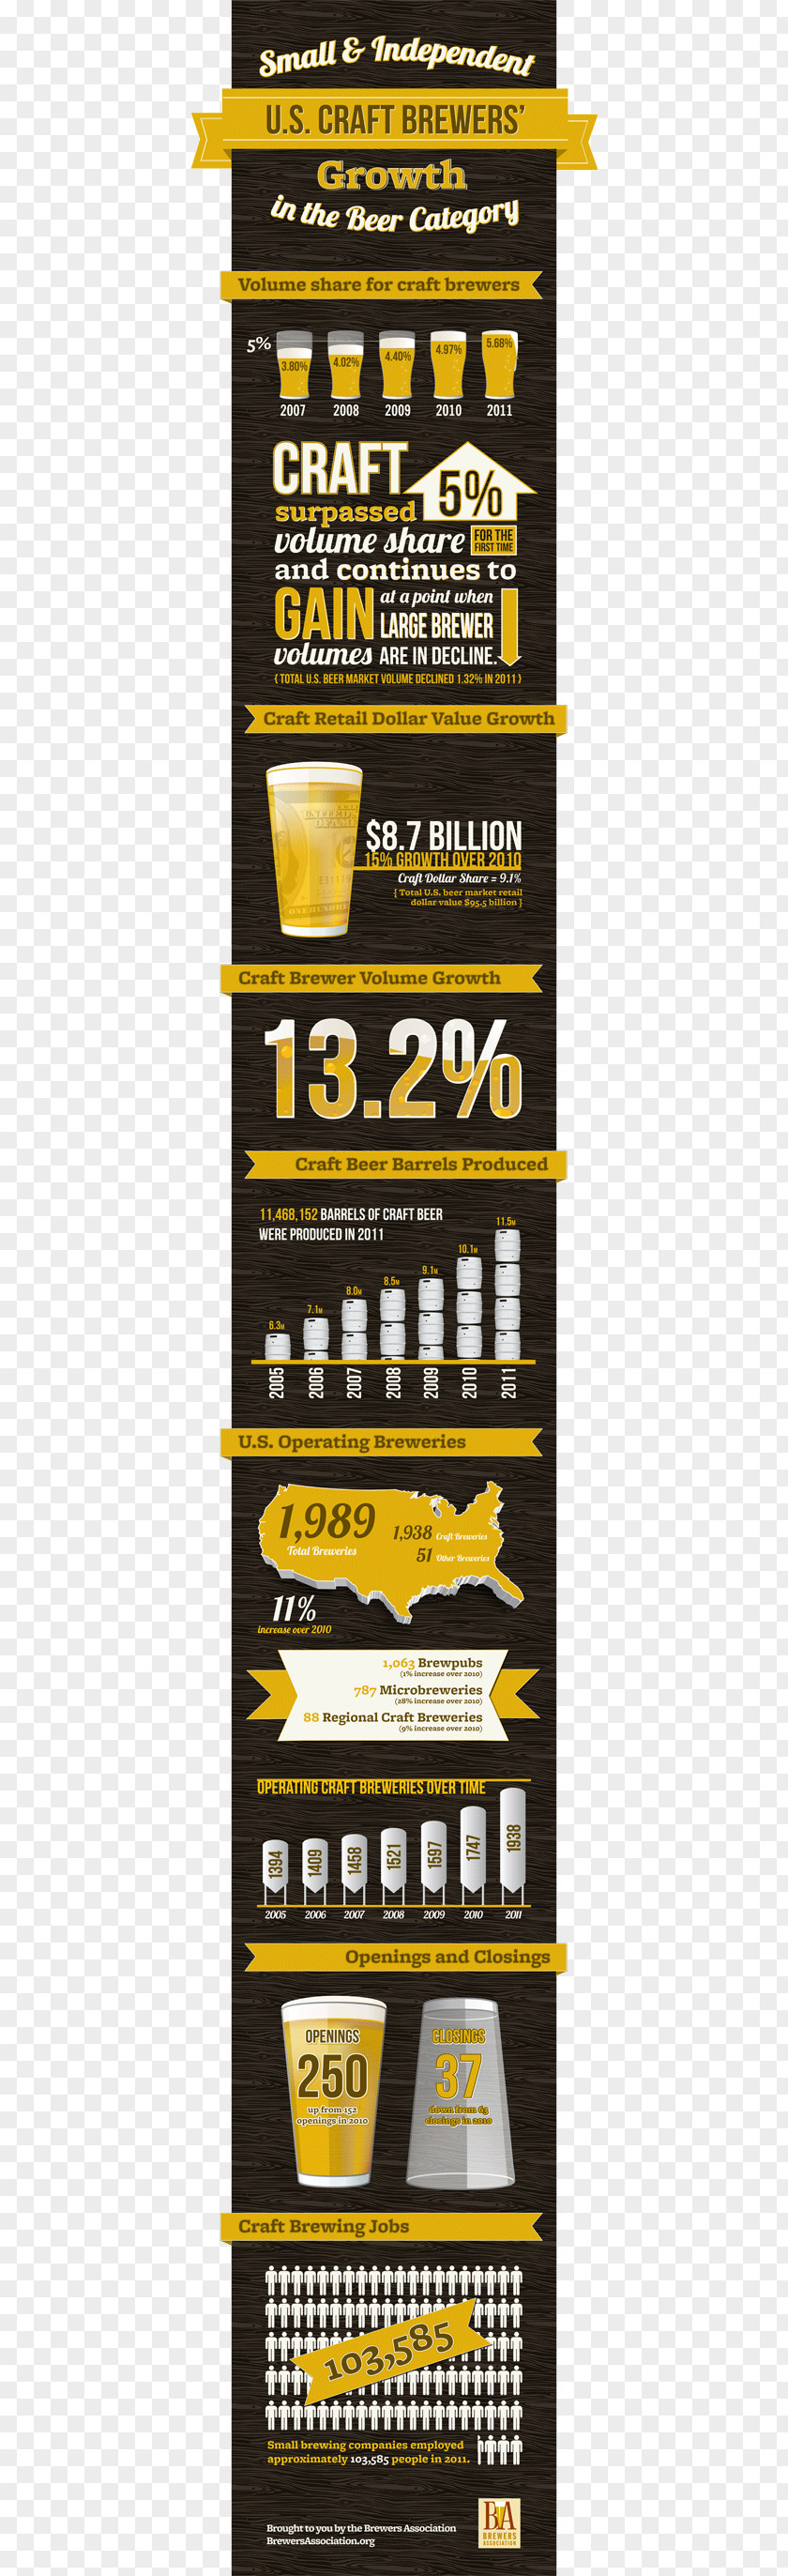 Growth Infographic Craft Beer Brewers Association Brewing Grains & Malts Brewery PNG